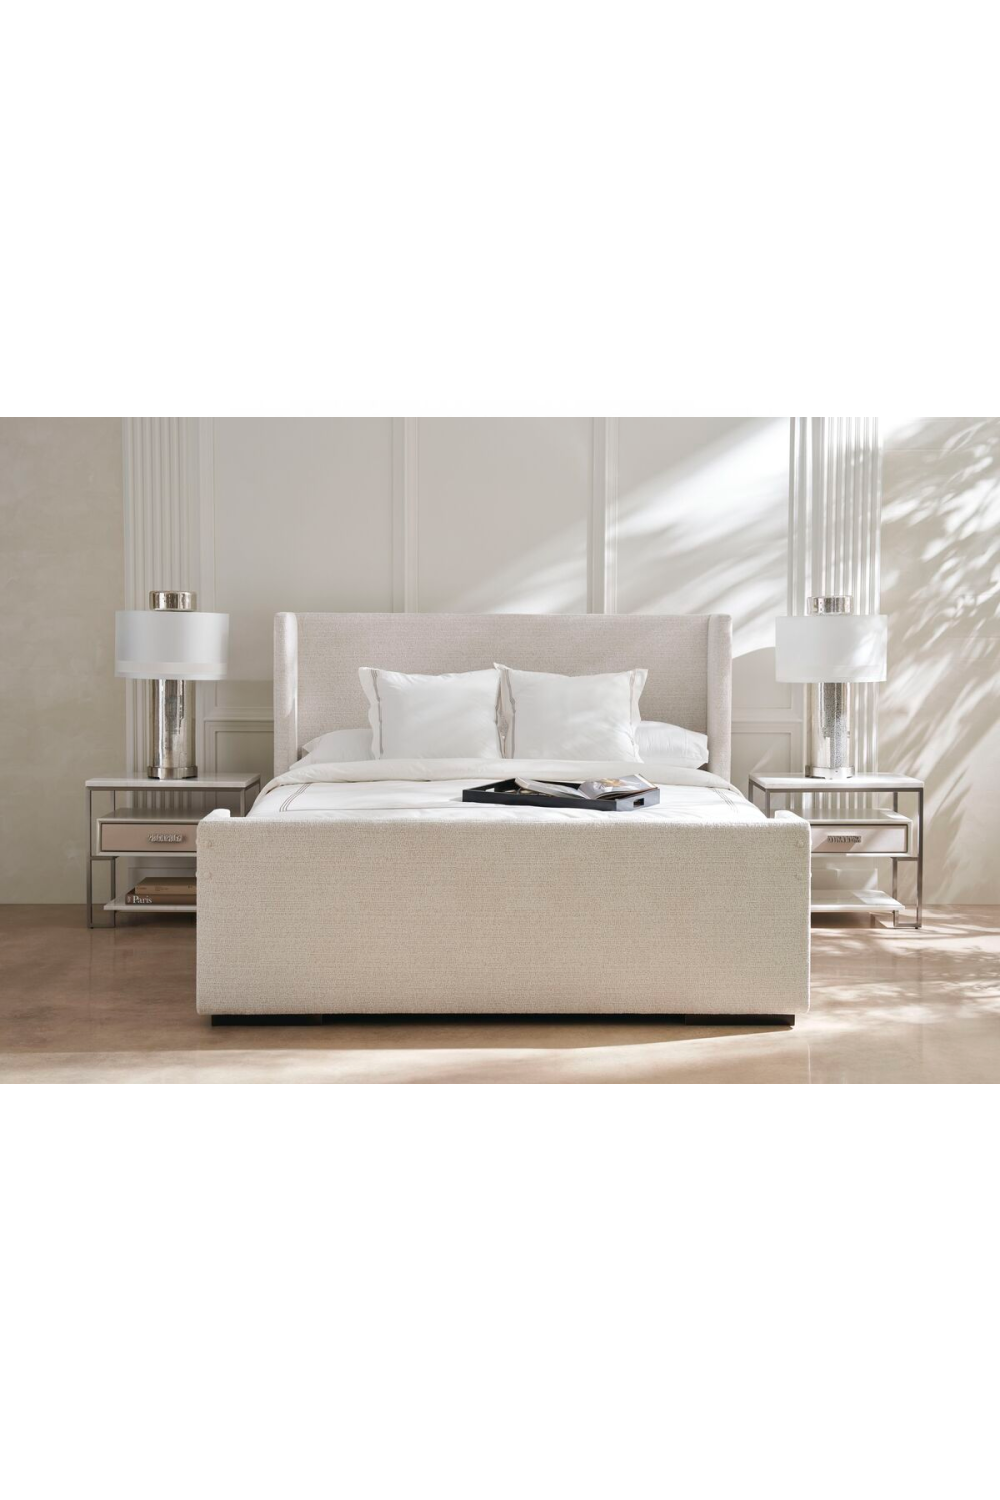 White Marble Nightstand | Caracole Marbleous | Oroa.com